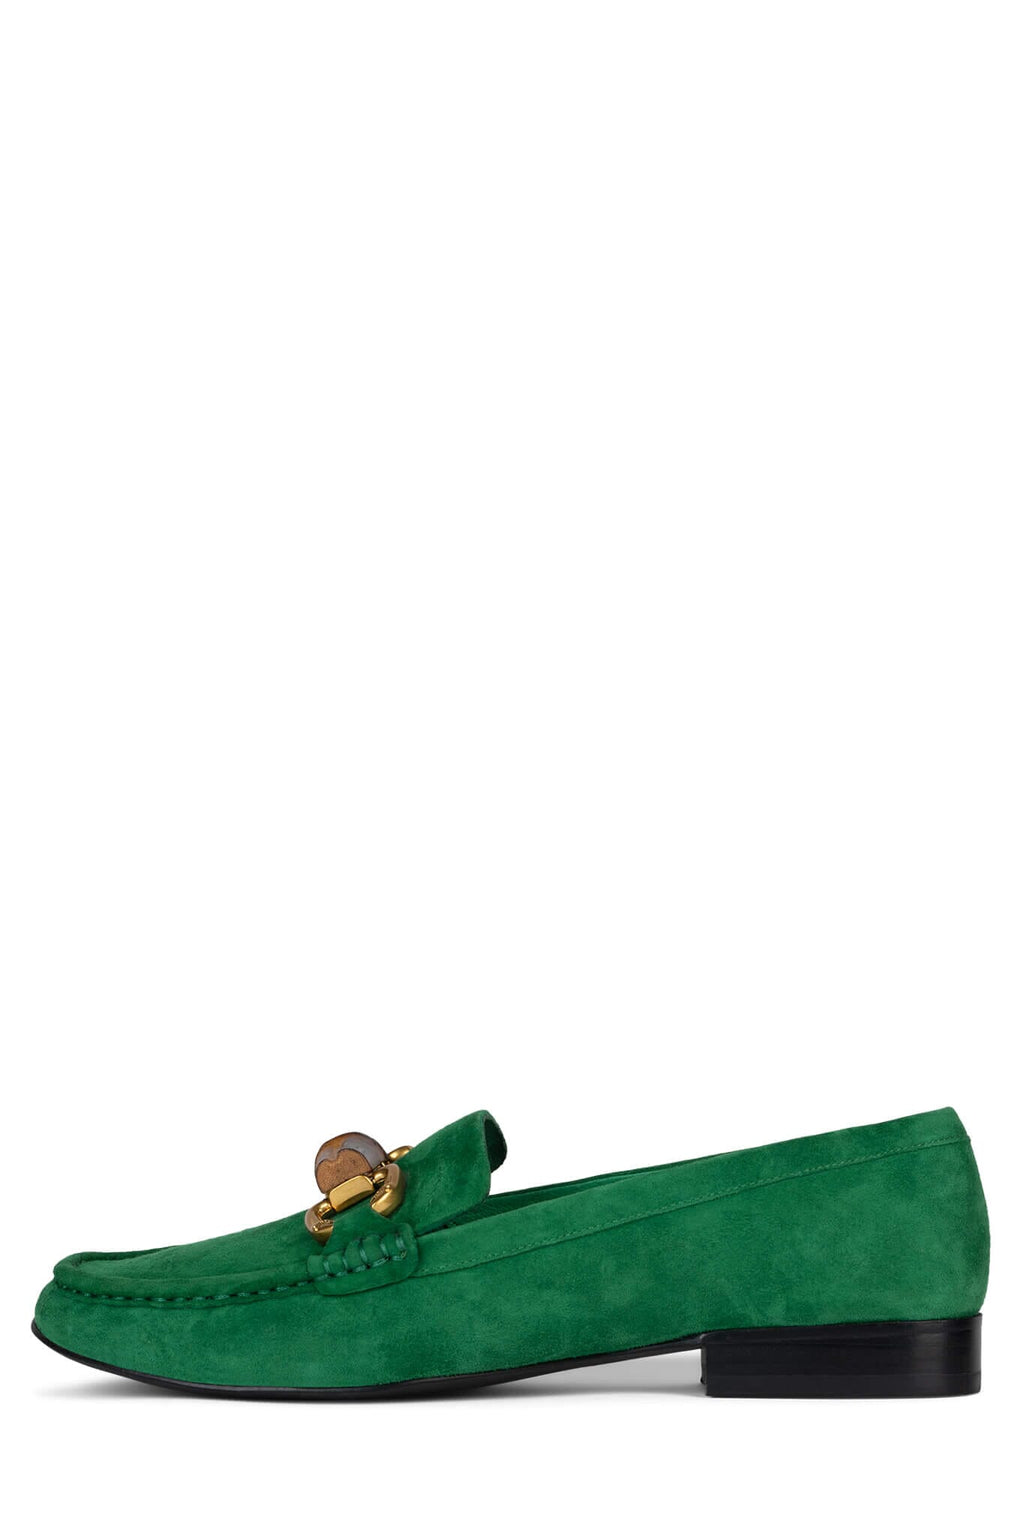 APPRENTICE Jeffrey Campbell Green Suede Gold 6 